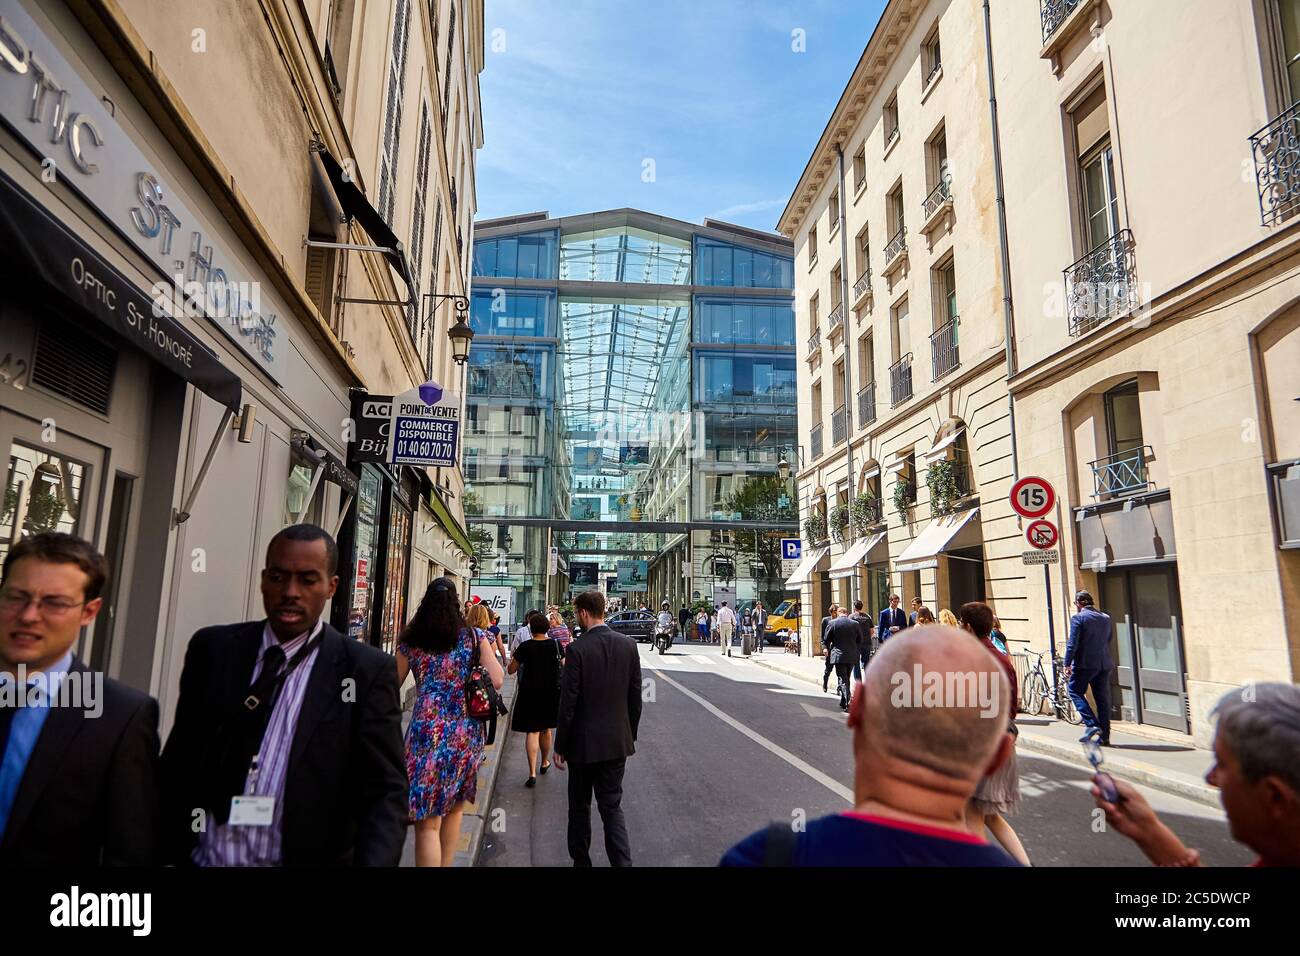 Paris, France - June 29, 2015: Rue du Marché Saint-Honoré. Passage des Jacobins. View of the glass facade of the building with many shops and offices. Stock Photo